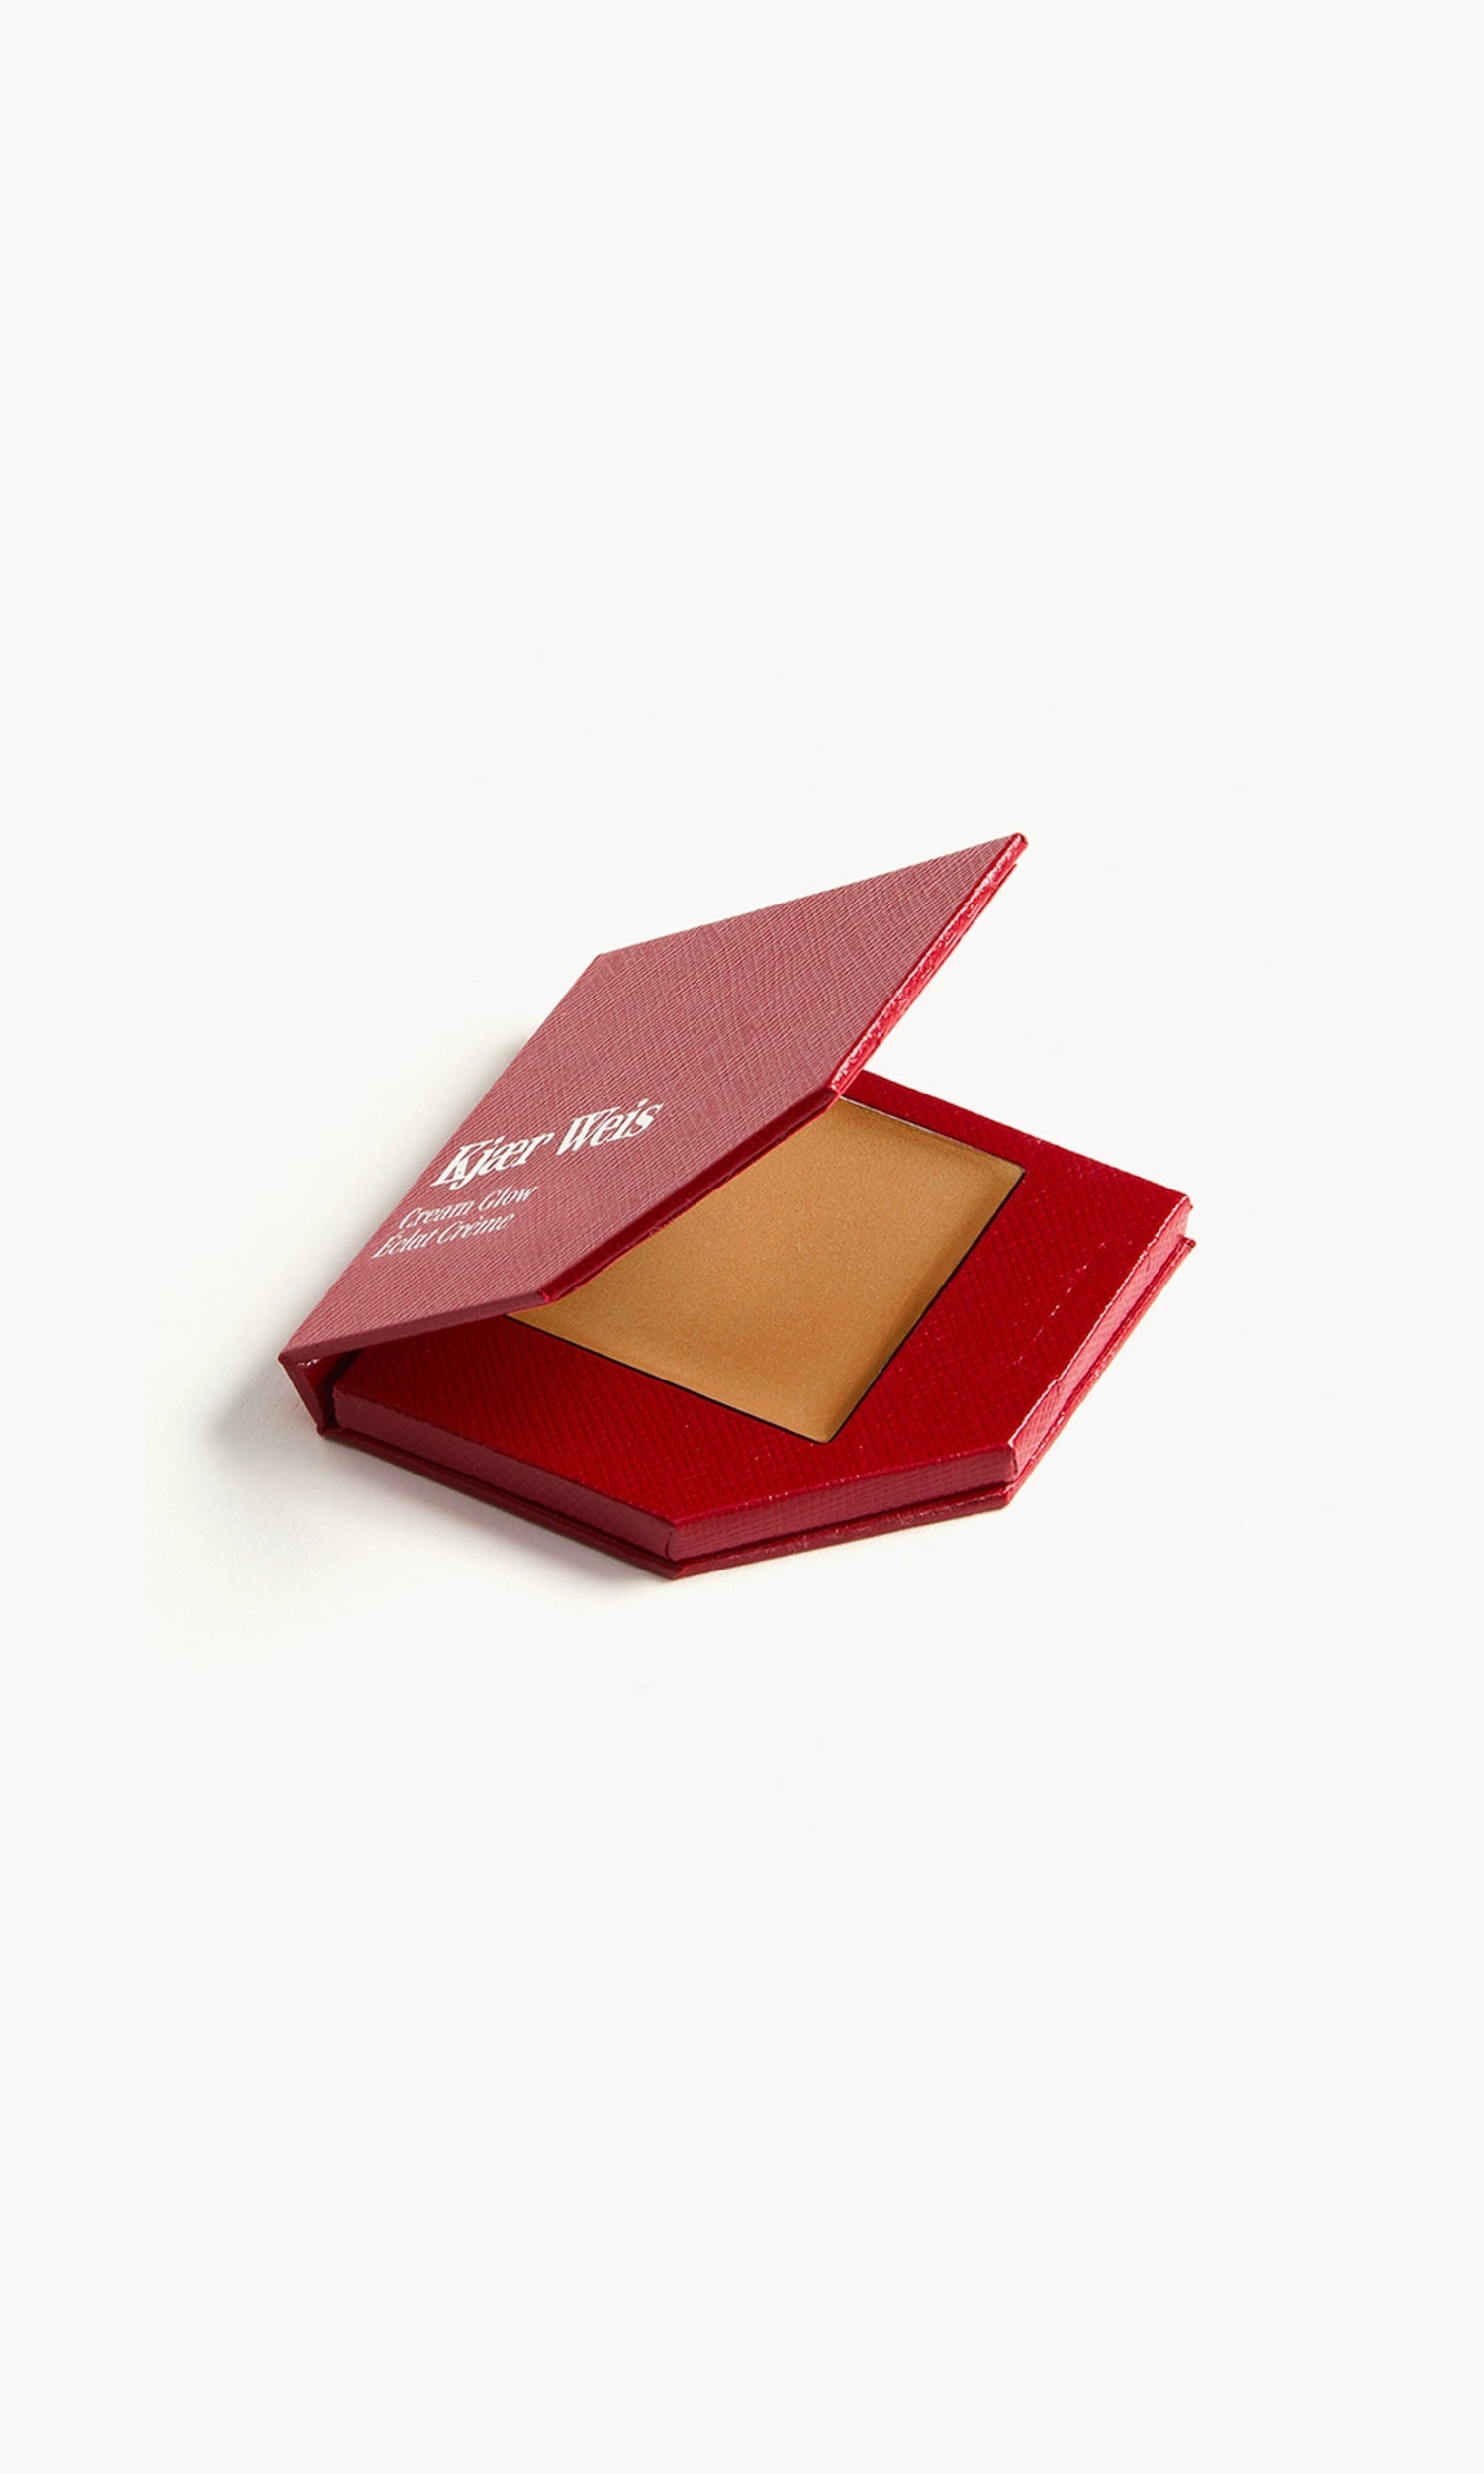 a red kw palette with the lid open to show the cream glow